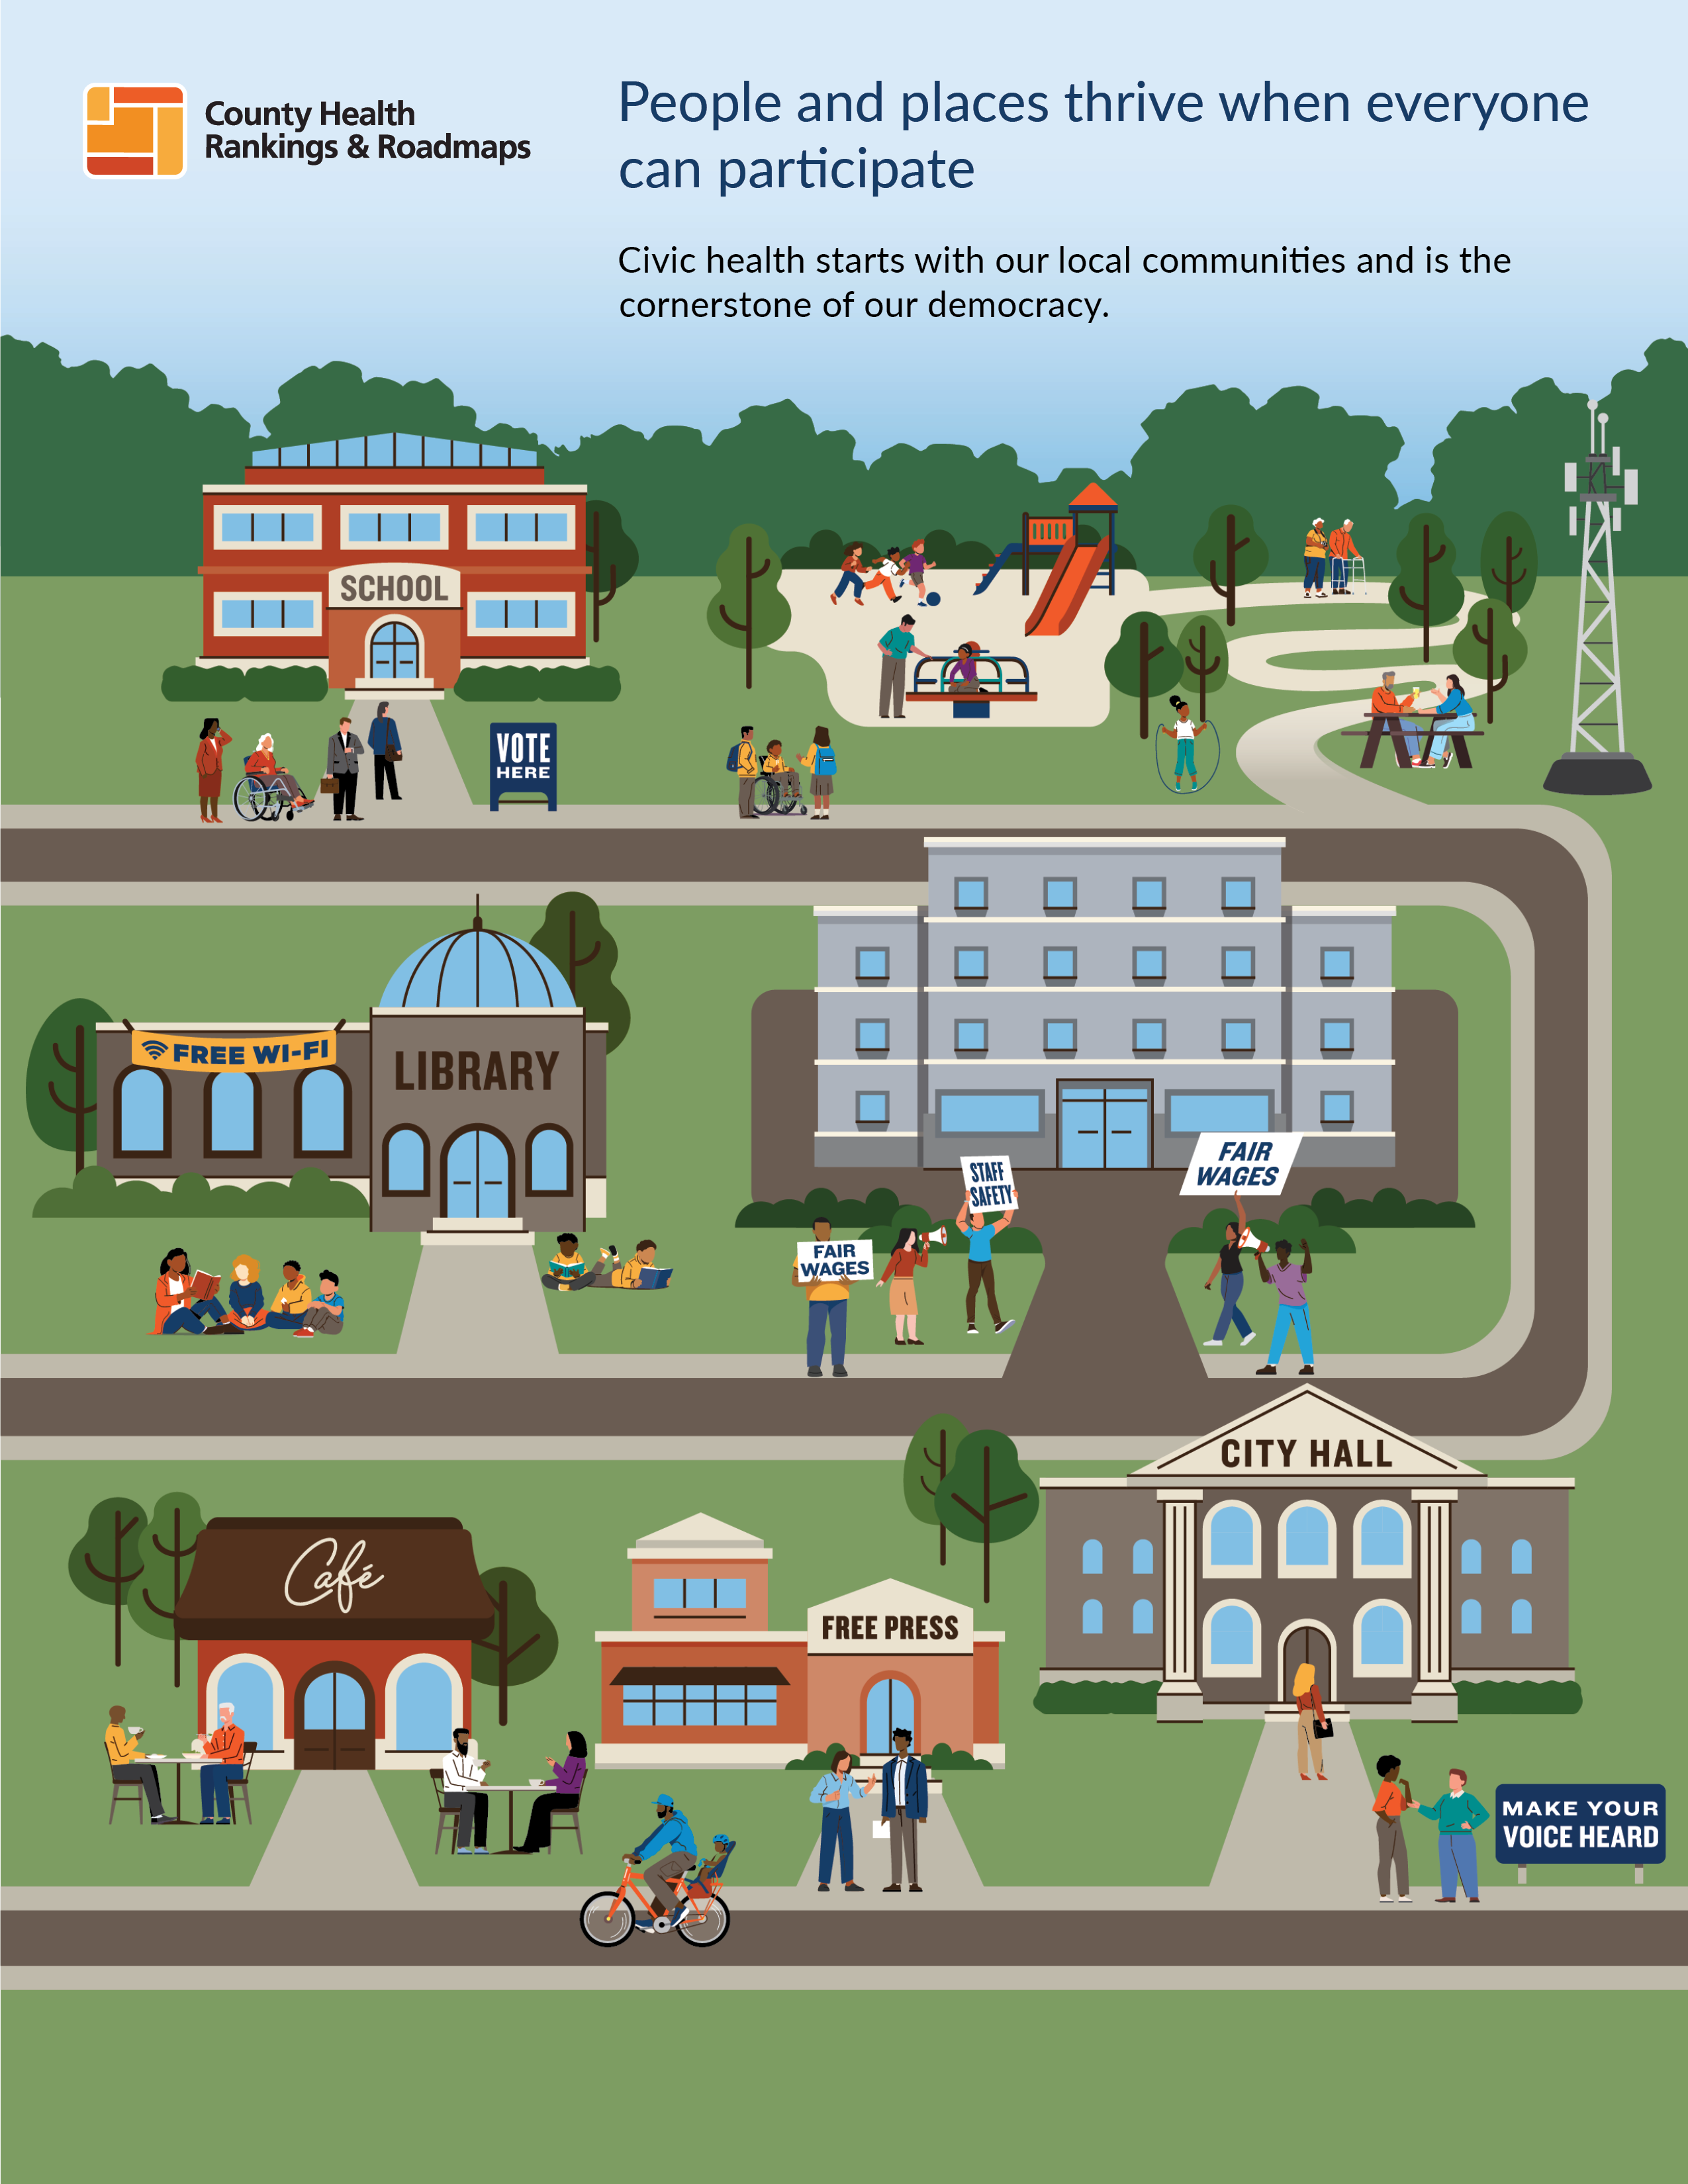 Infographic image showing various locations within a city. Heading text reads: People and places thrive when everyone can participate. Civic health starts with our local communities and is the cornerstone of our democracy.